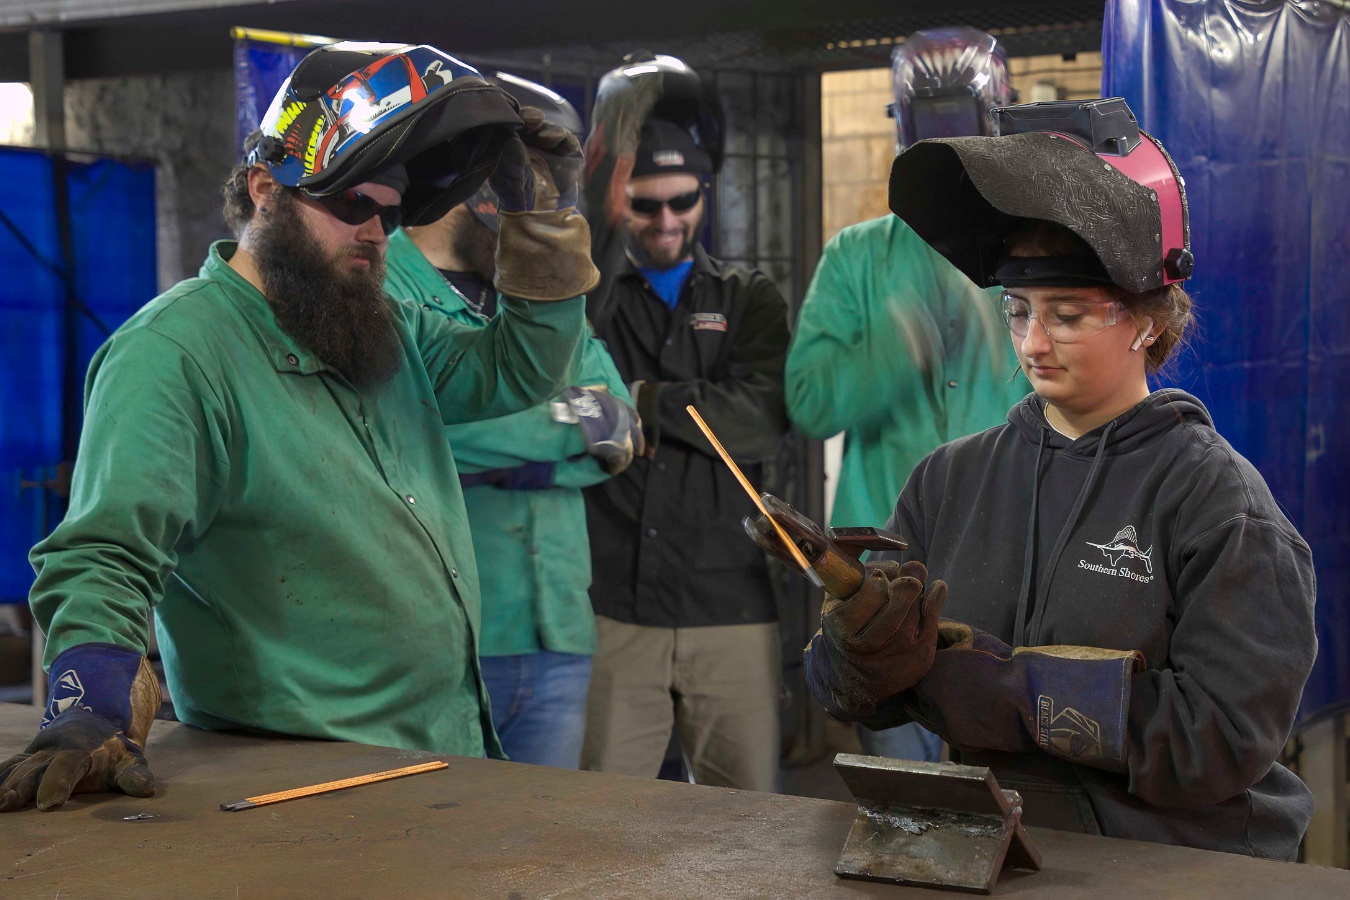 Group of welding students, with a female student in focus, working on a project.